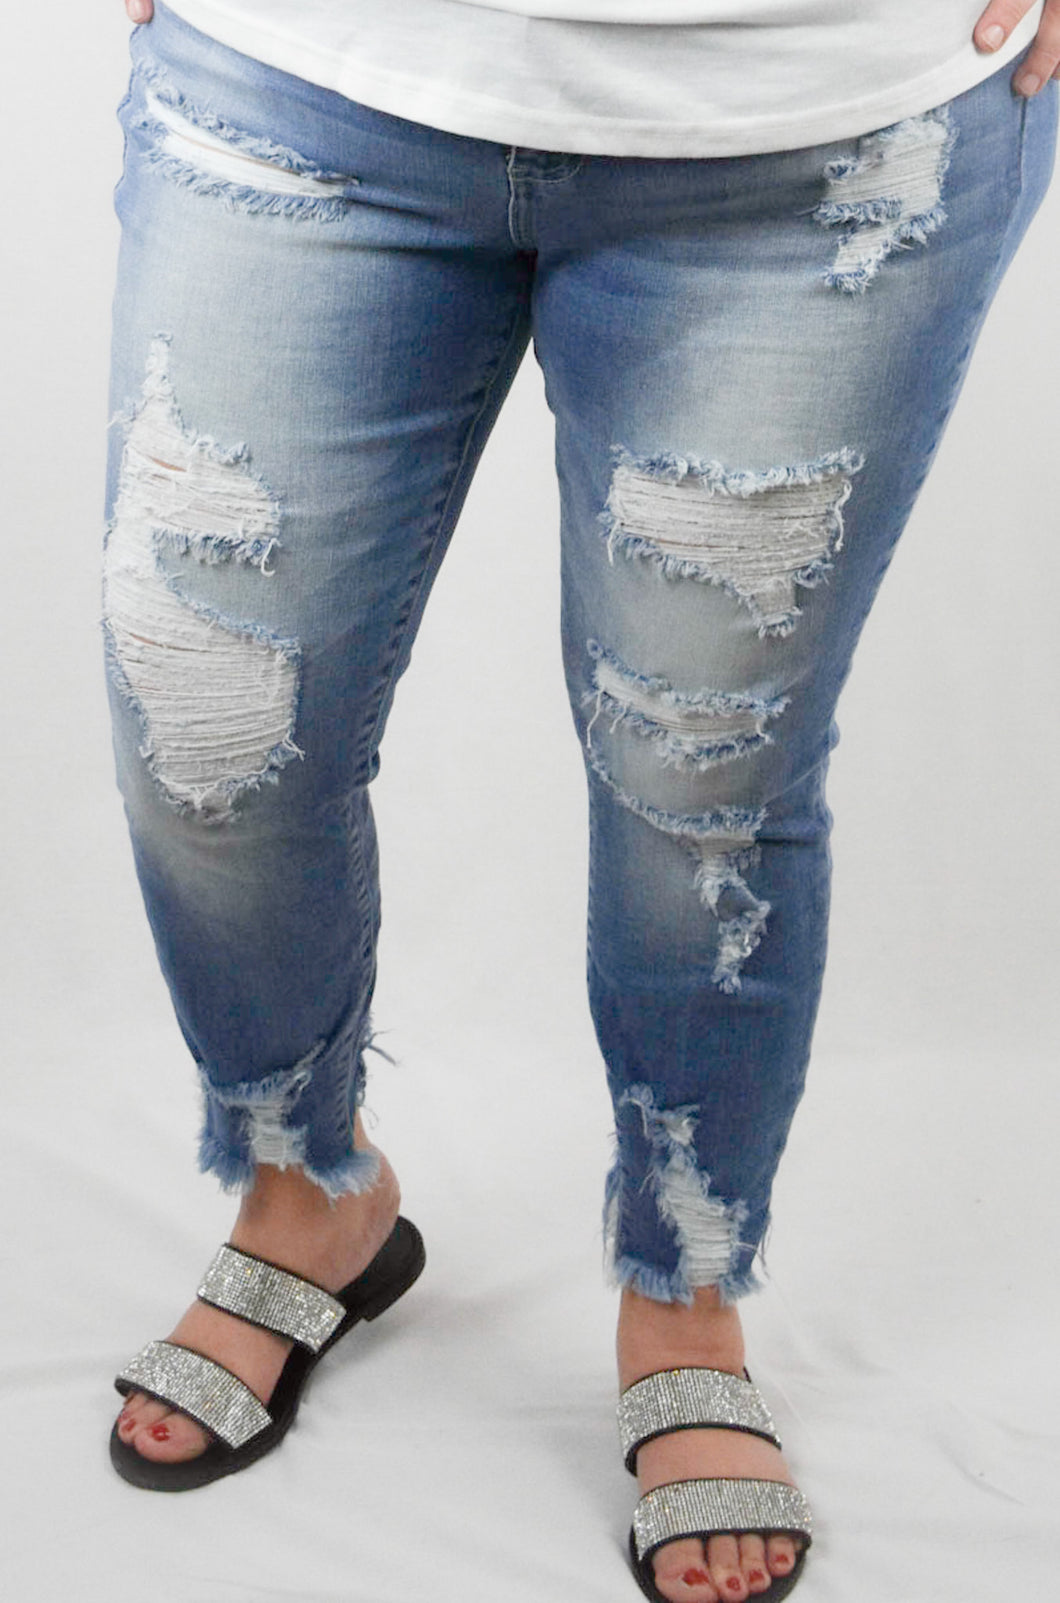 These Cello Distressed Jeans are Always a Good Idea